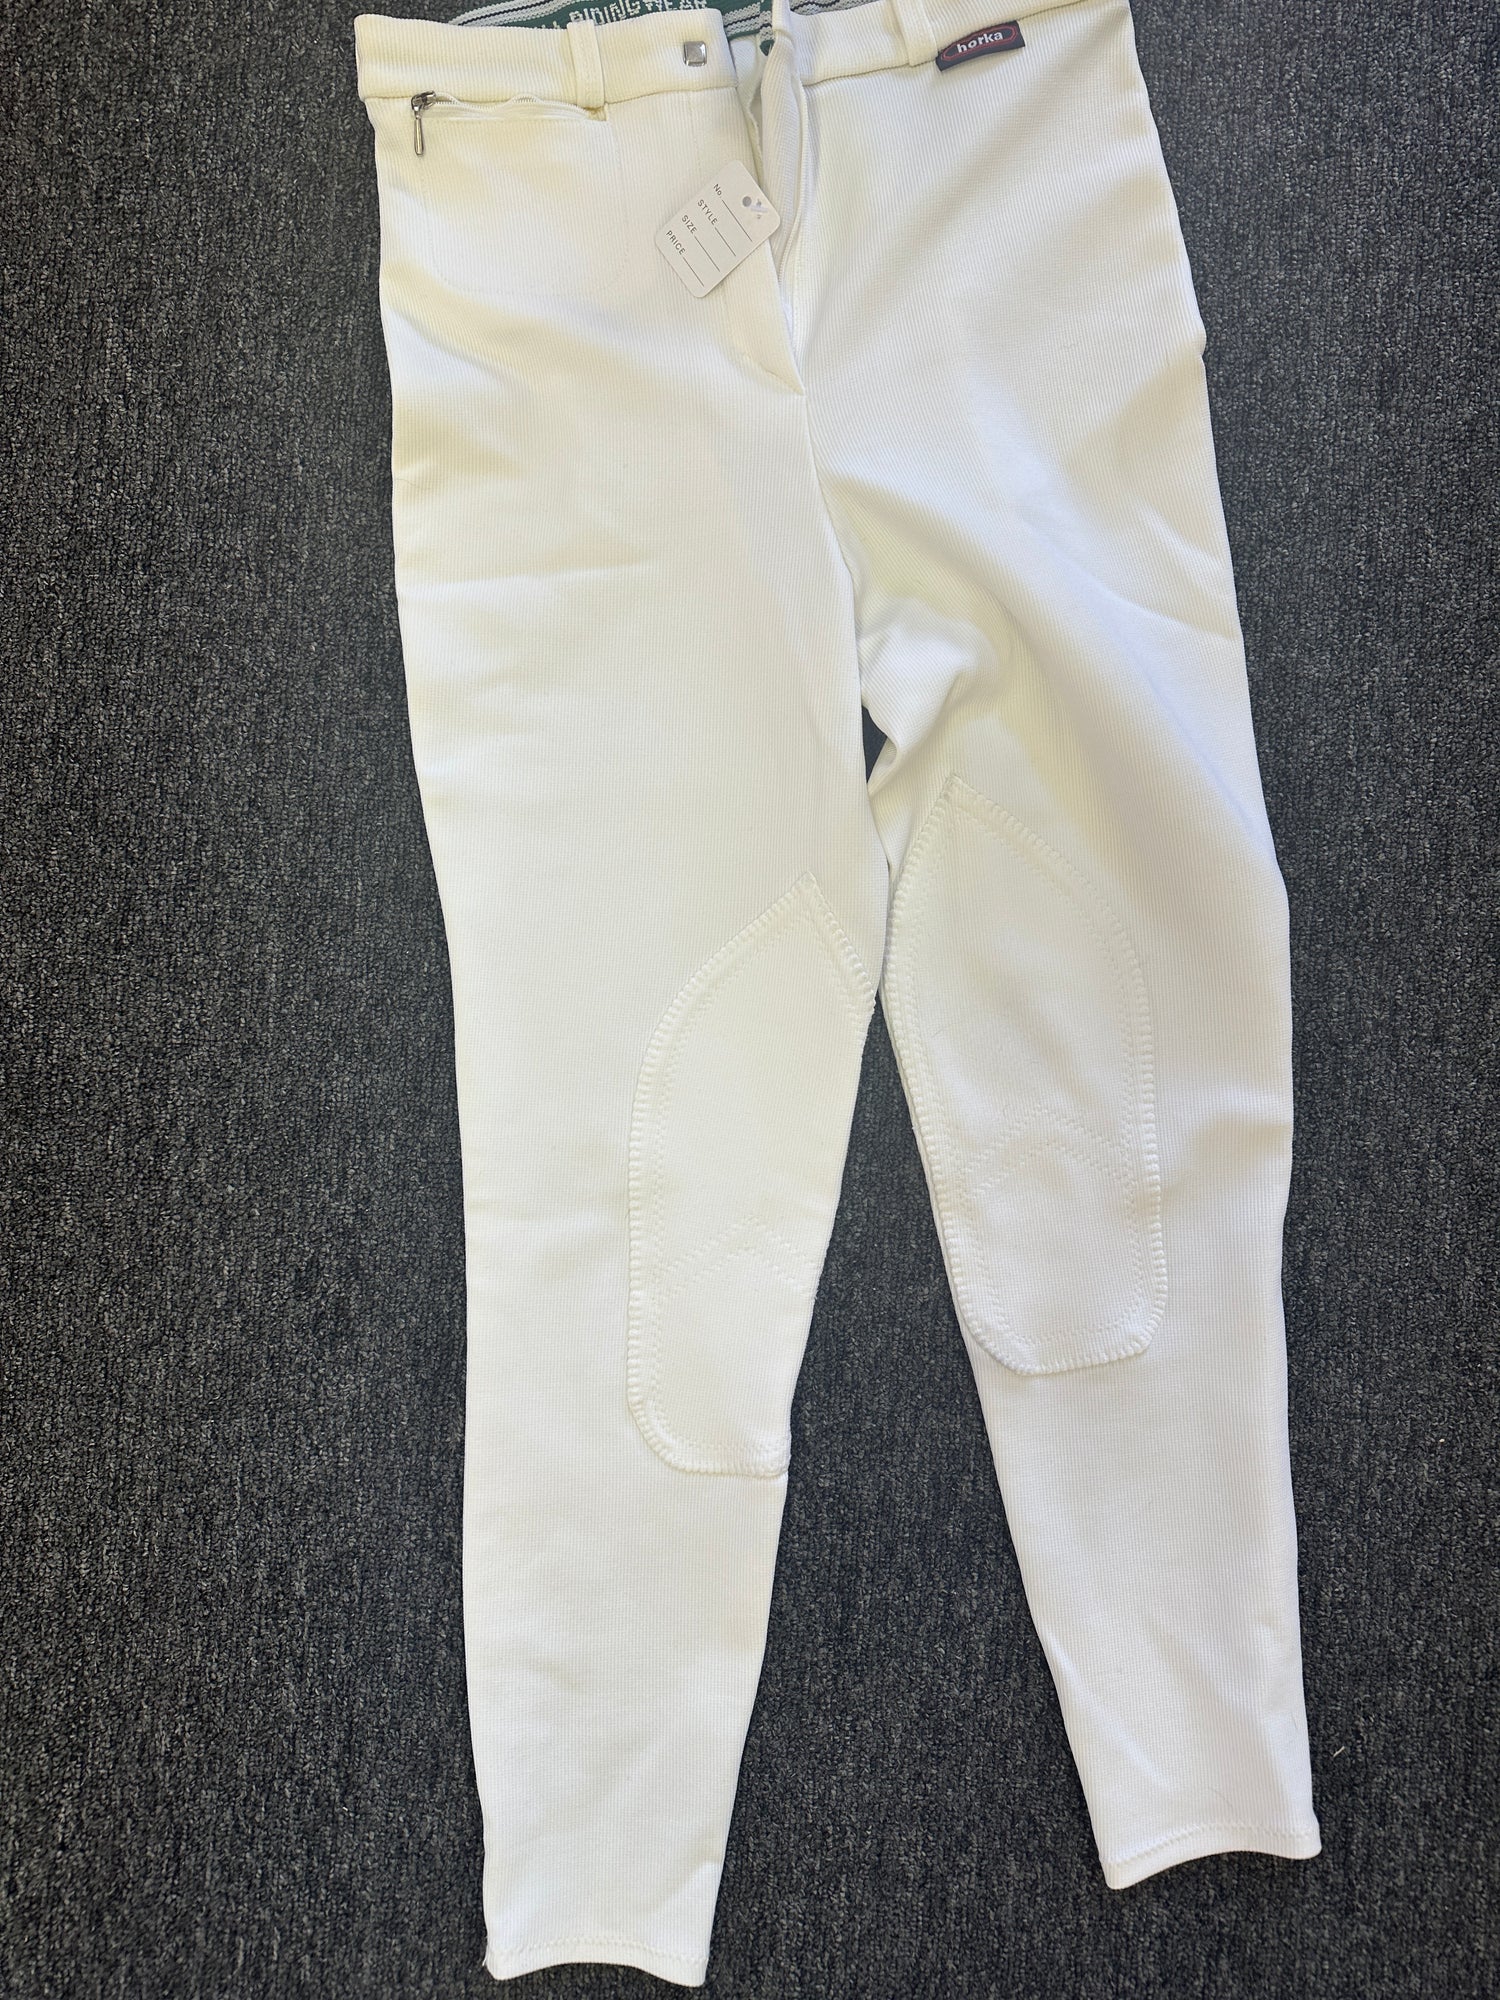 Women's Riding Breeches - Assorted Colors used